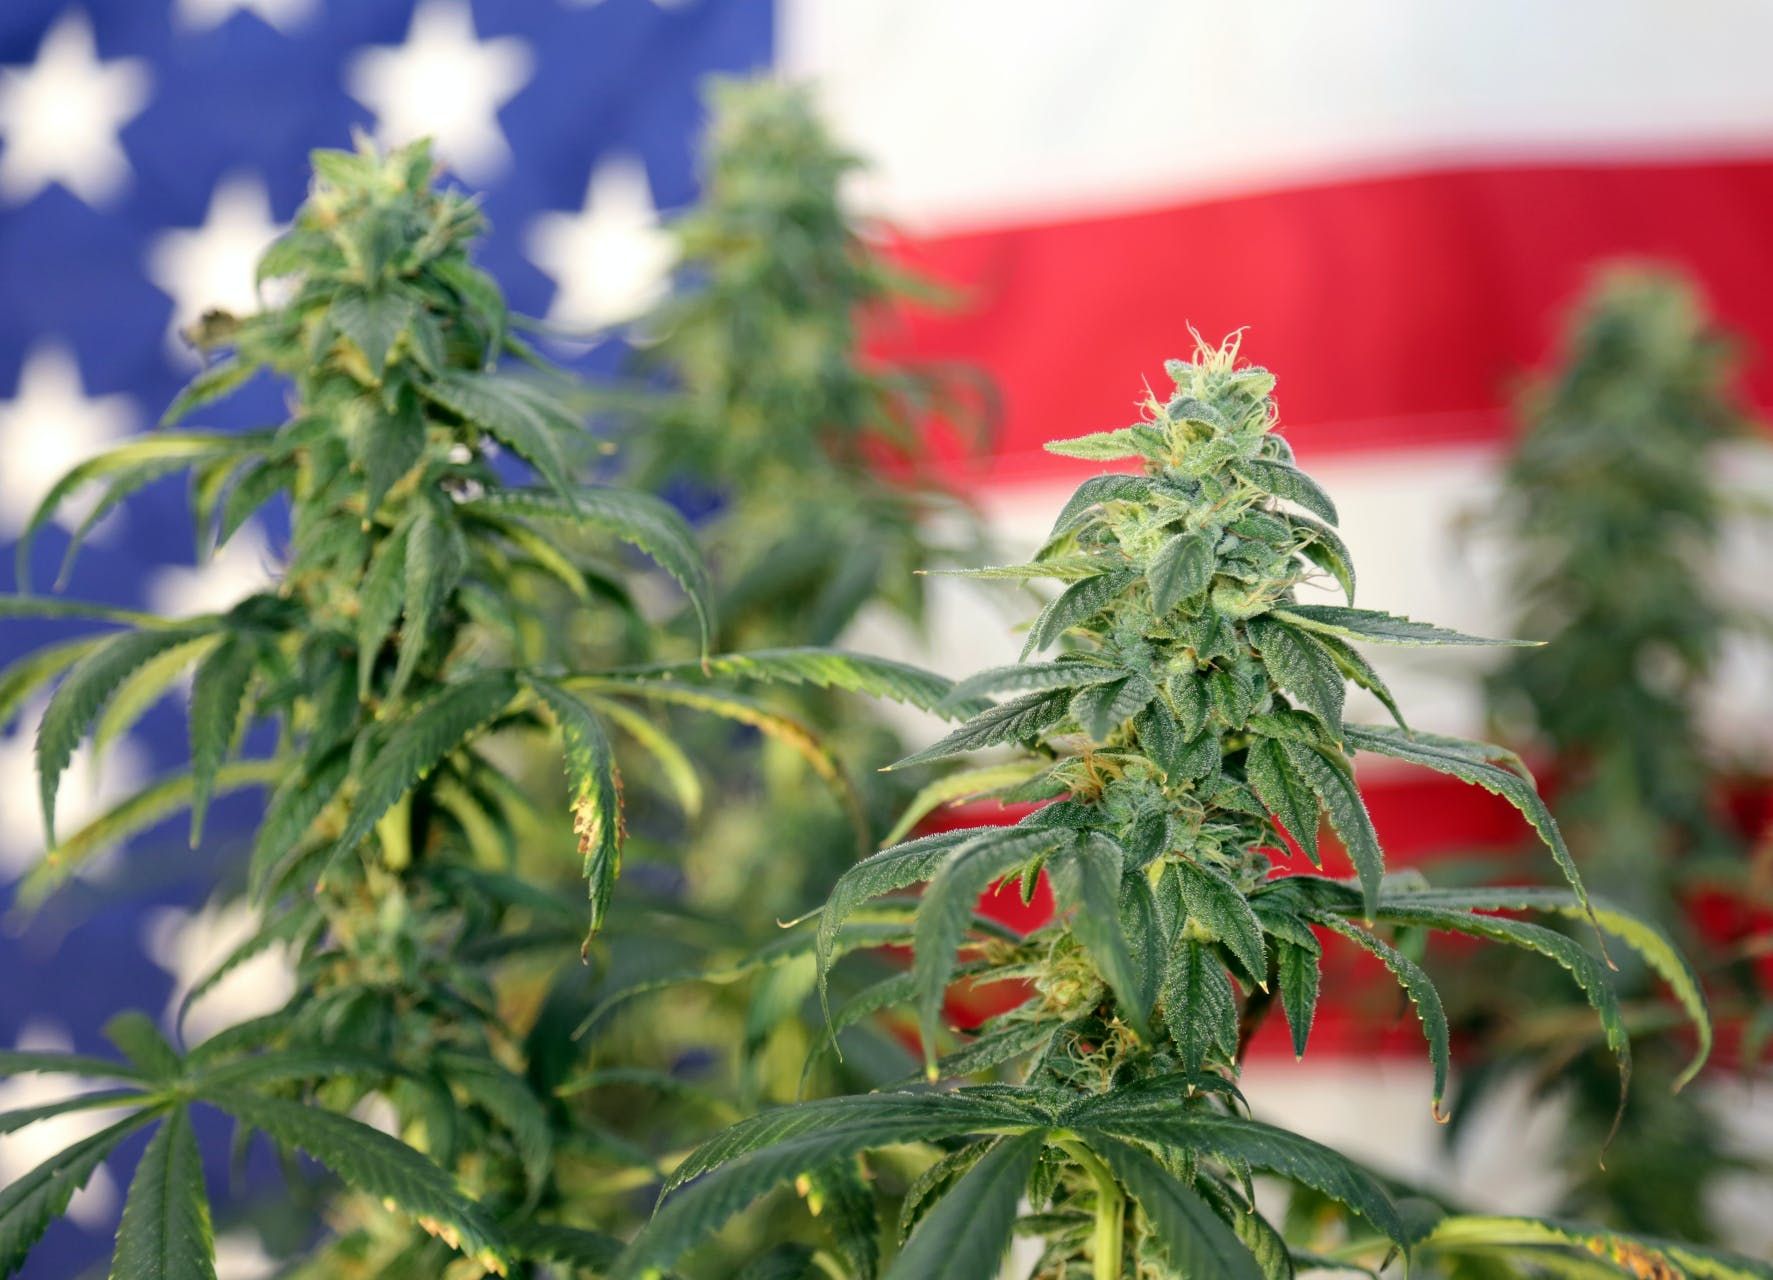 how_the_states_act_could_change_us_cannabis_laws_6b1522394c